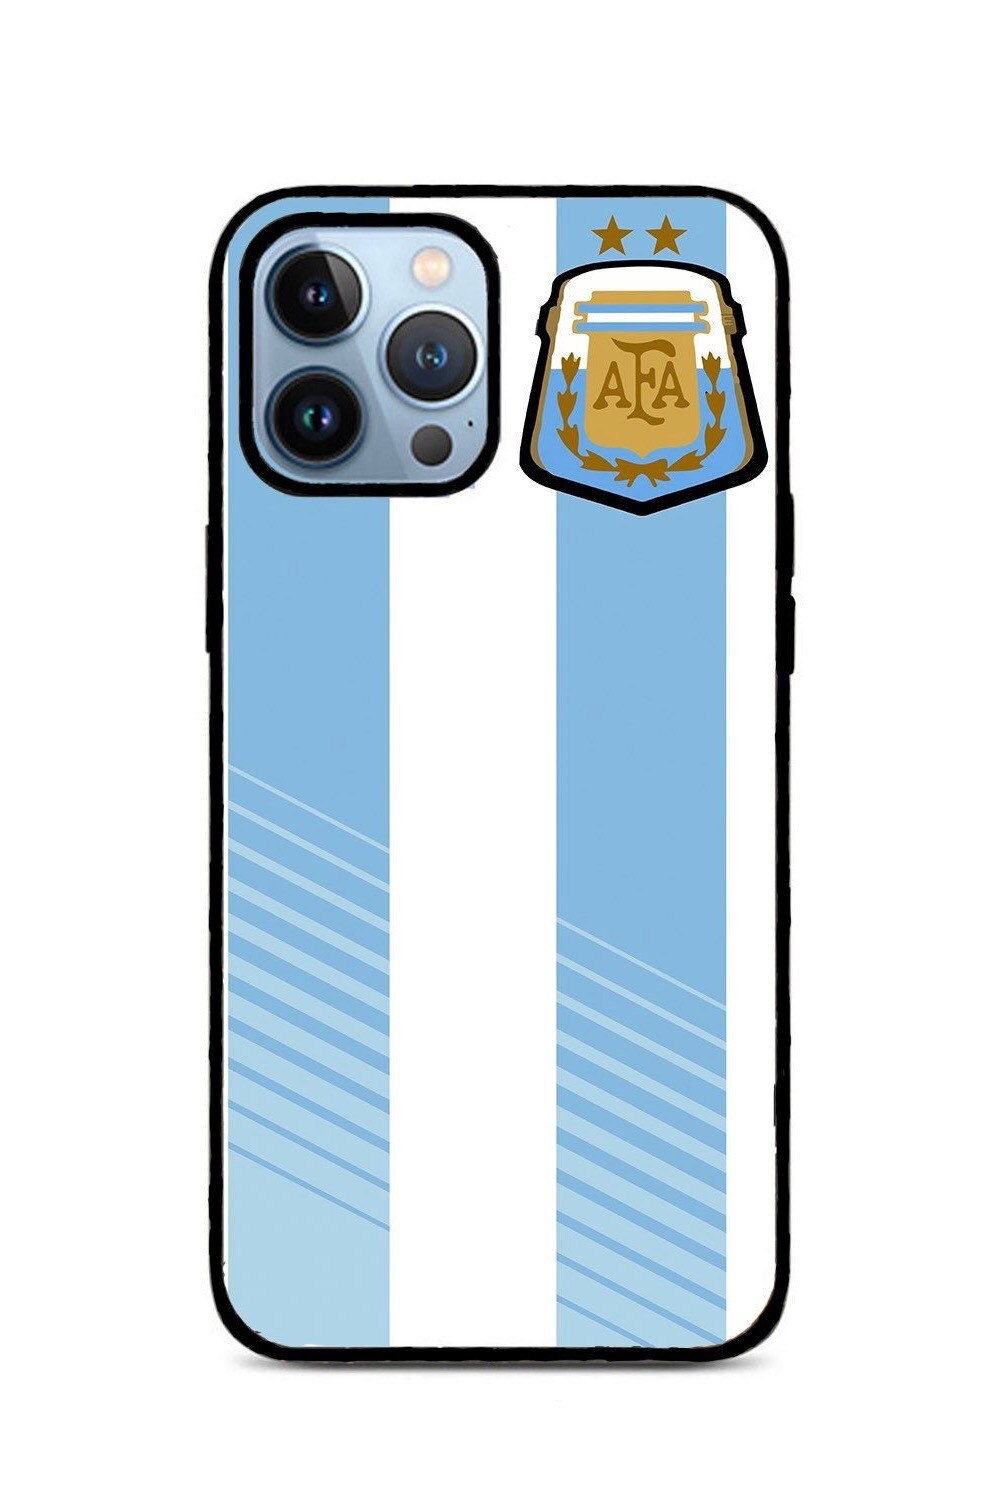 Argentina Coque For Iphone 14, Iphone 13, Iphone 12, & Iphone 11 Models World Cup Argentina Soccer Team Fk-11549-1